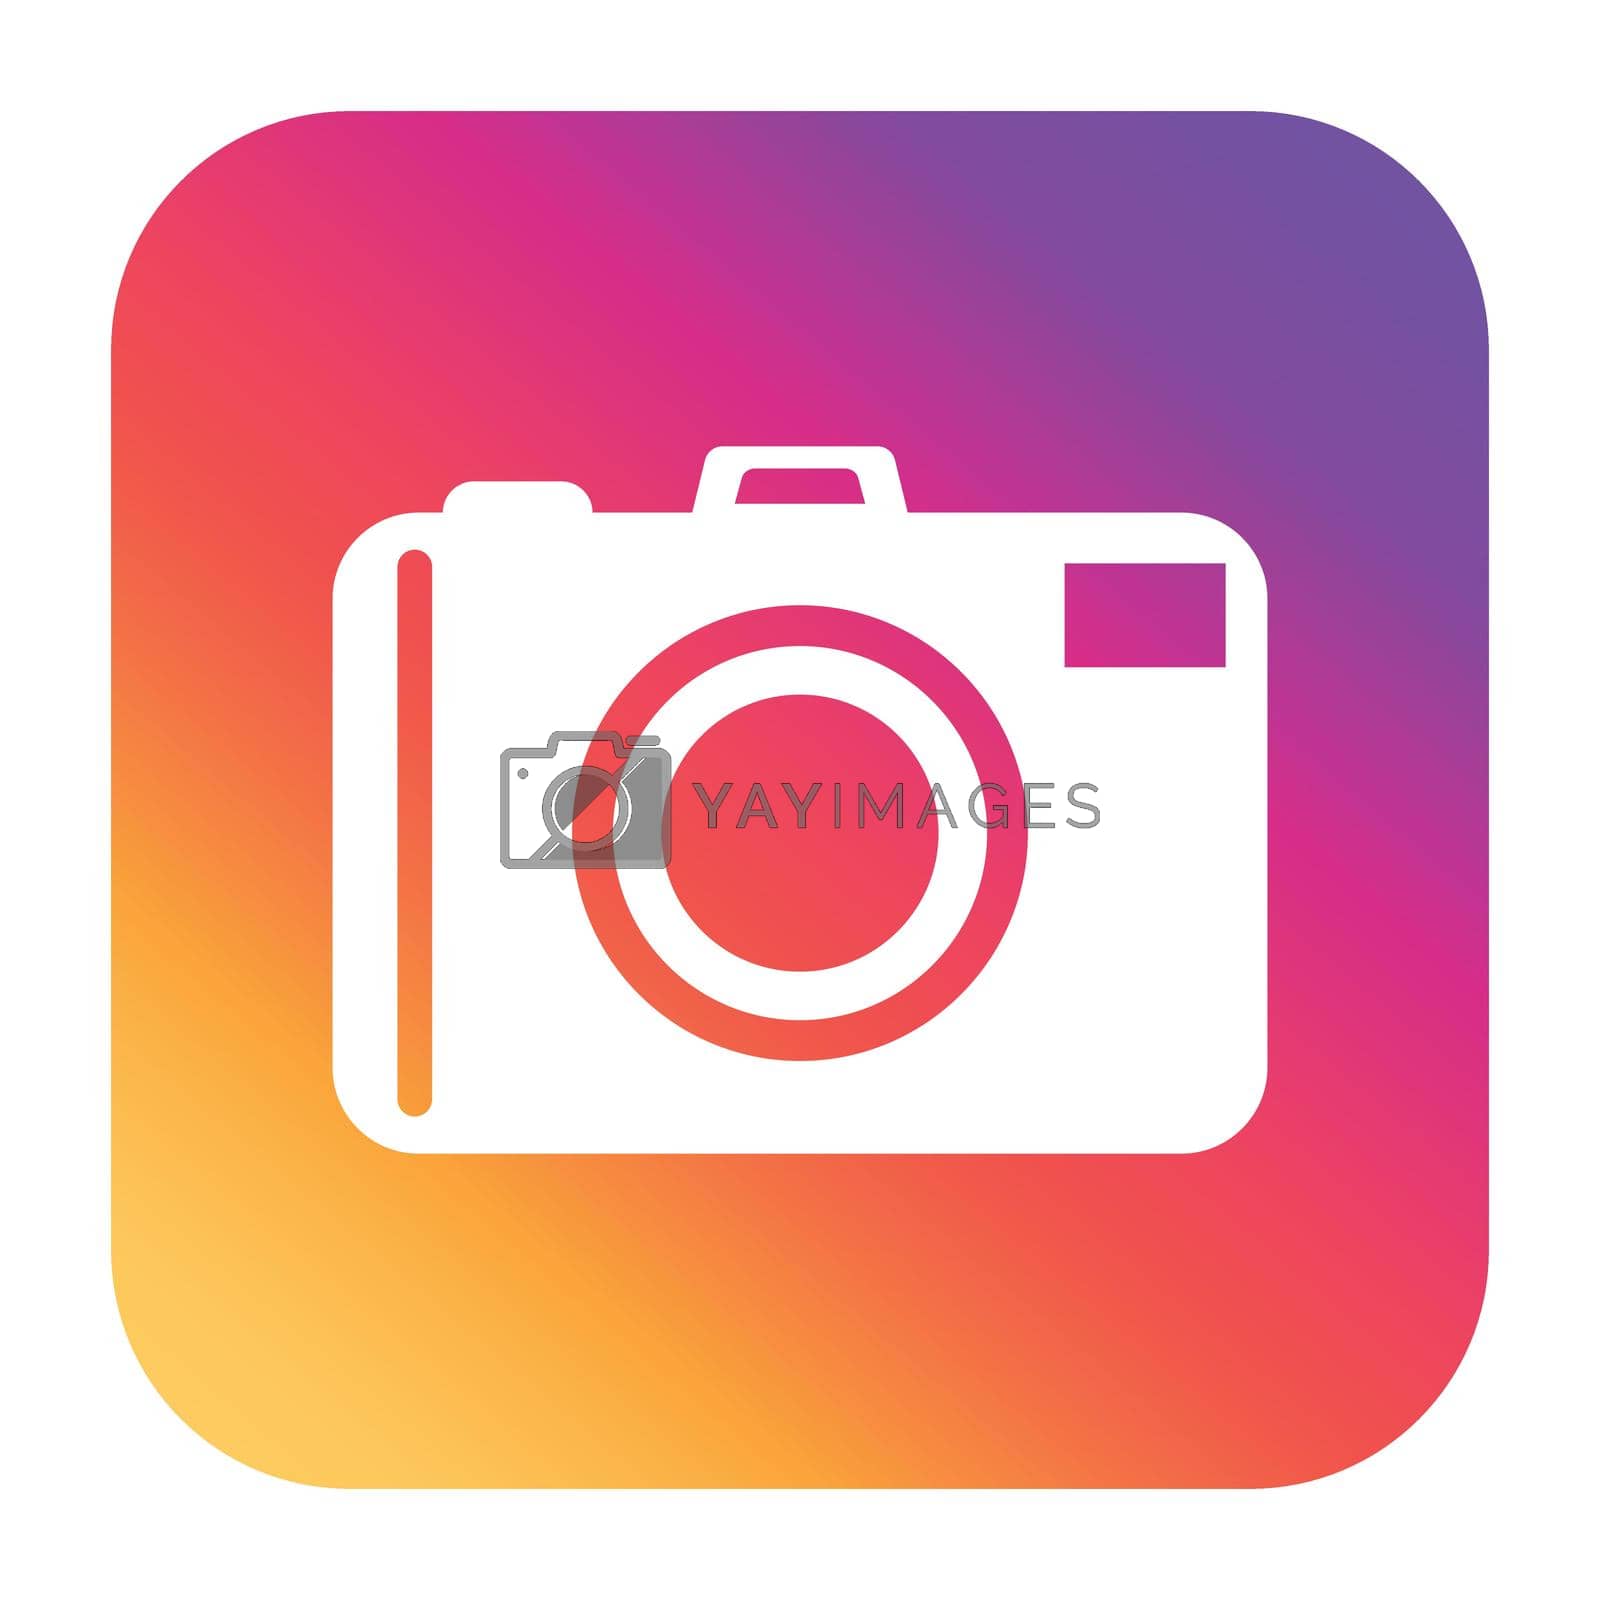 Royalty free image of Camera icon on gradient background. Flat vector illustration. by LysenkoA